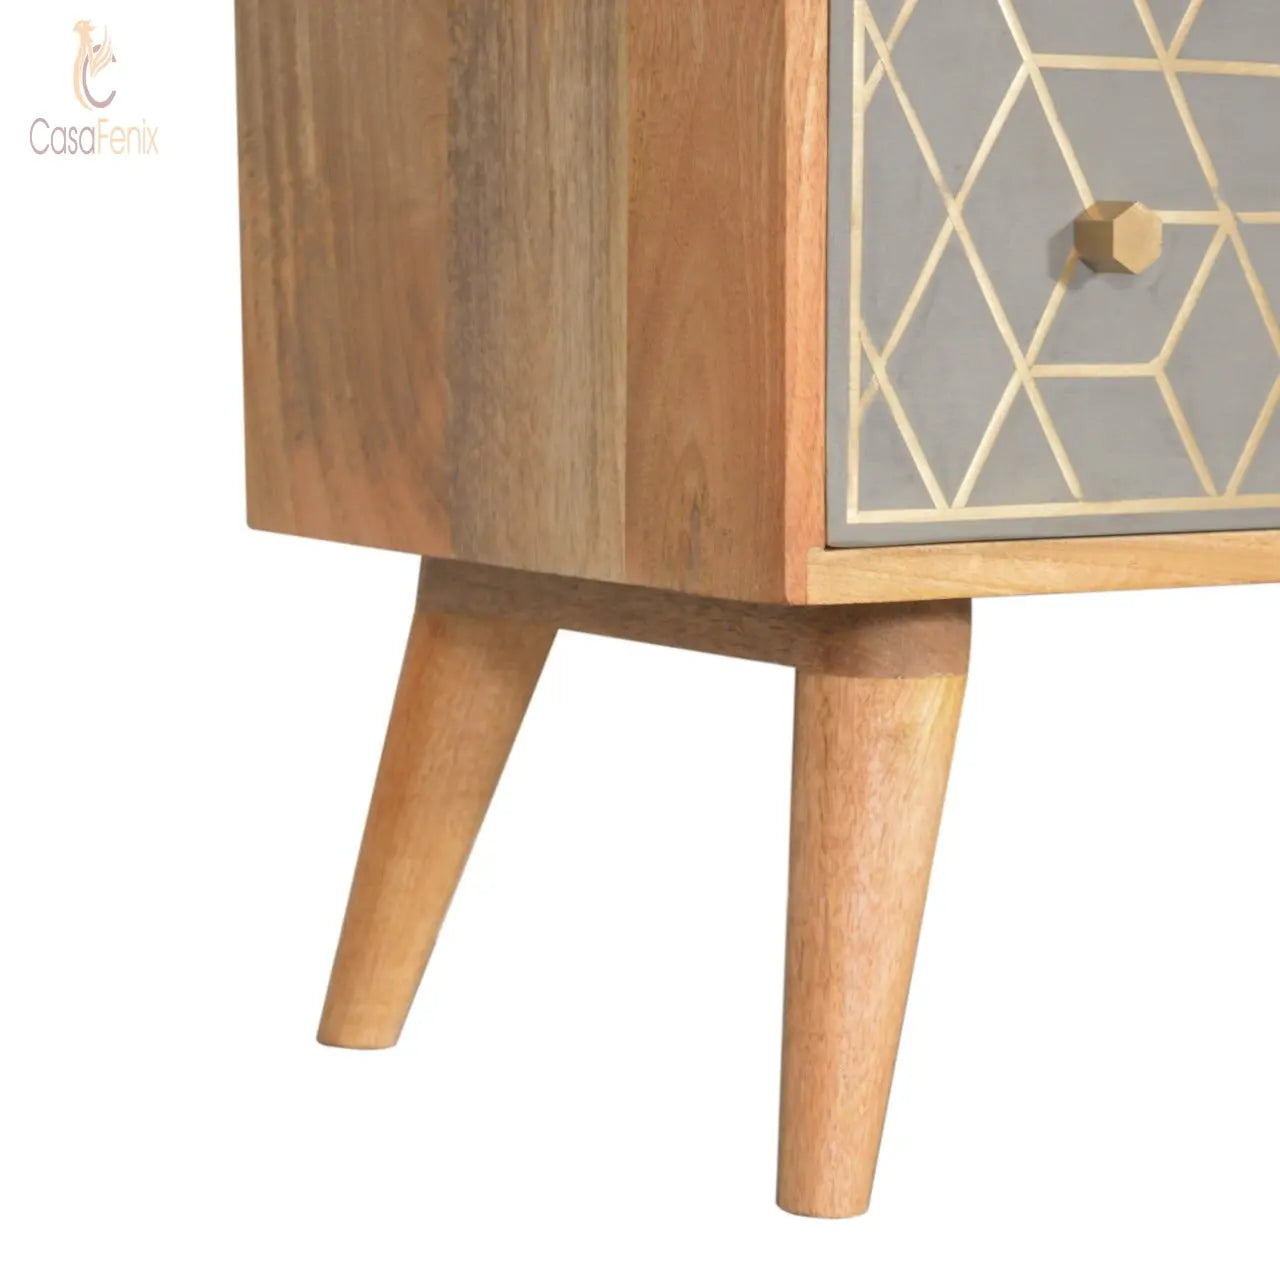 Dice 3 Drawer Chest 100% solid mango wood in an oak-ish finish - CasaFenix